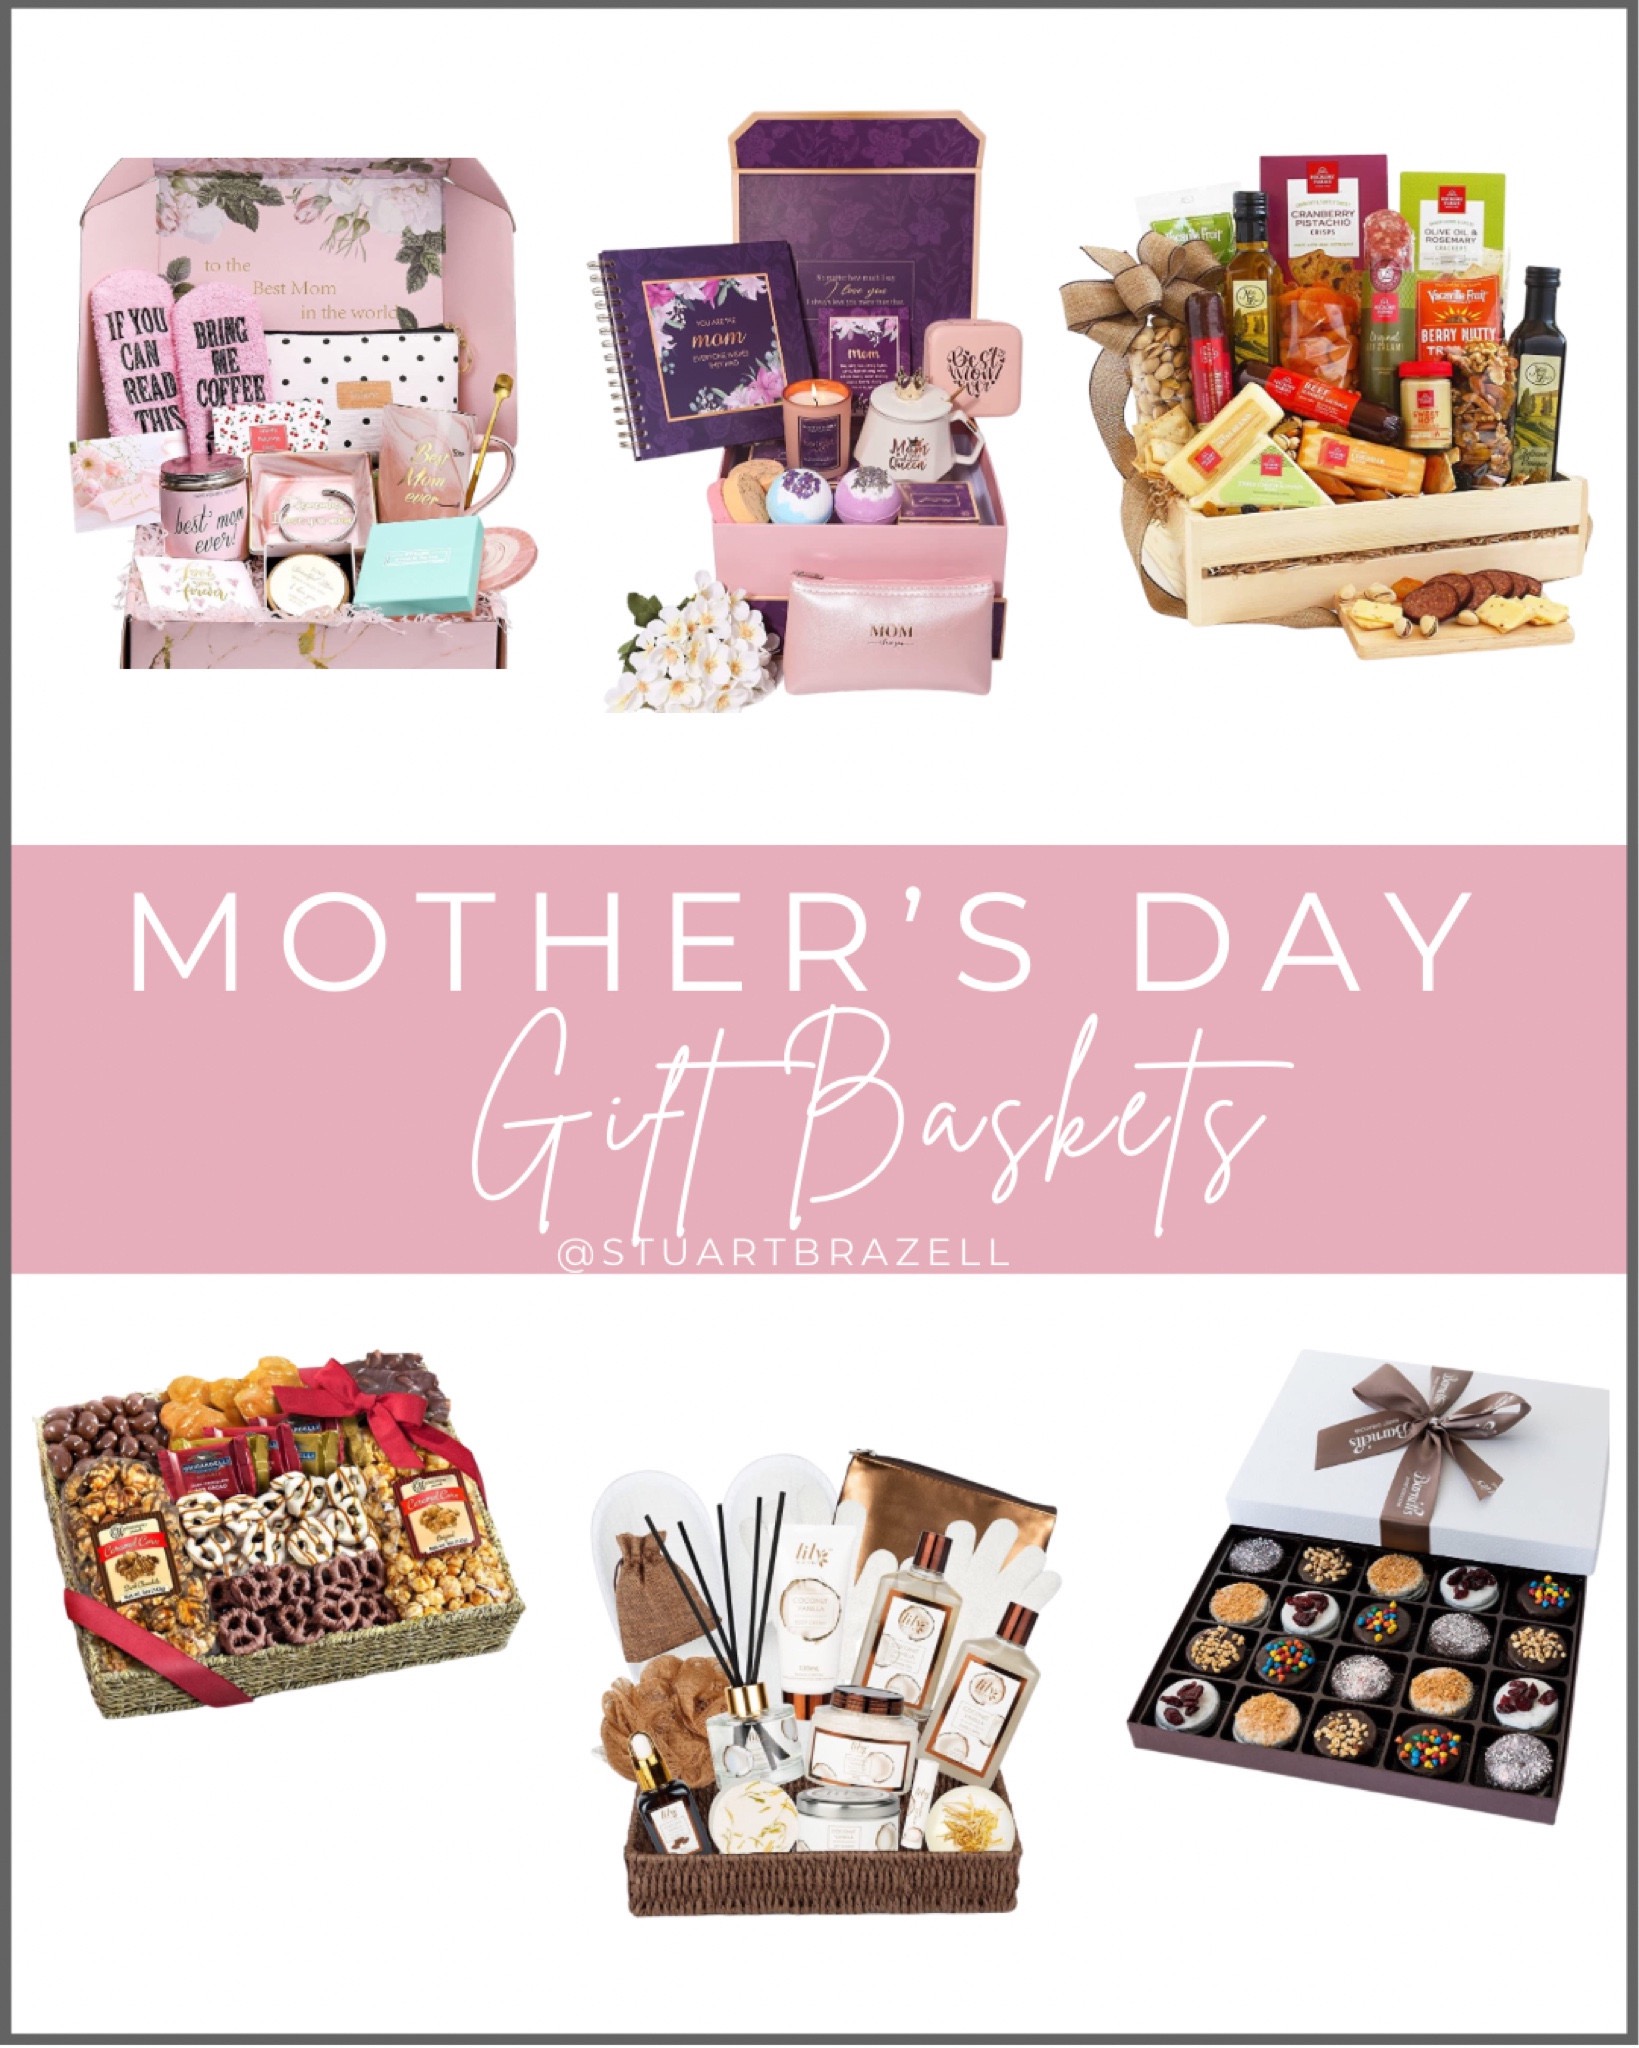 Last Minute Mother’s Day Gift Ideas from Amazon